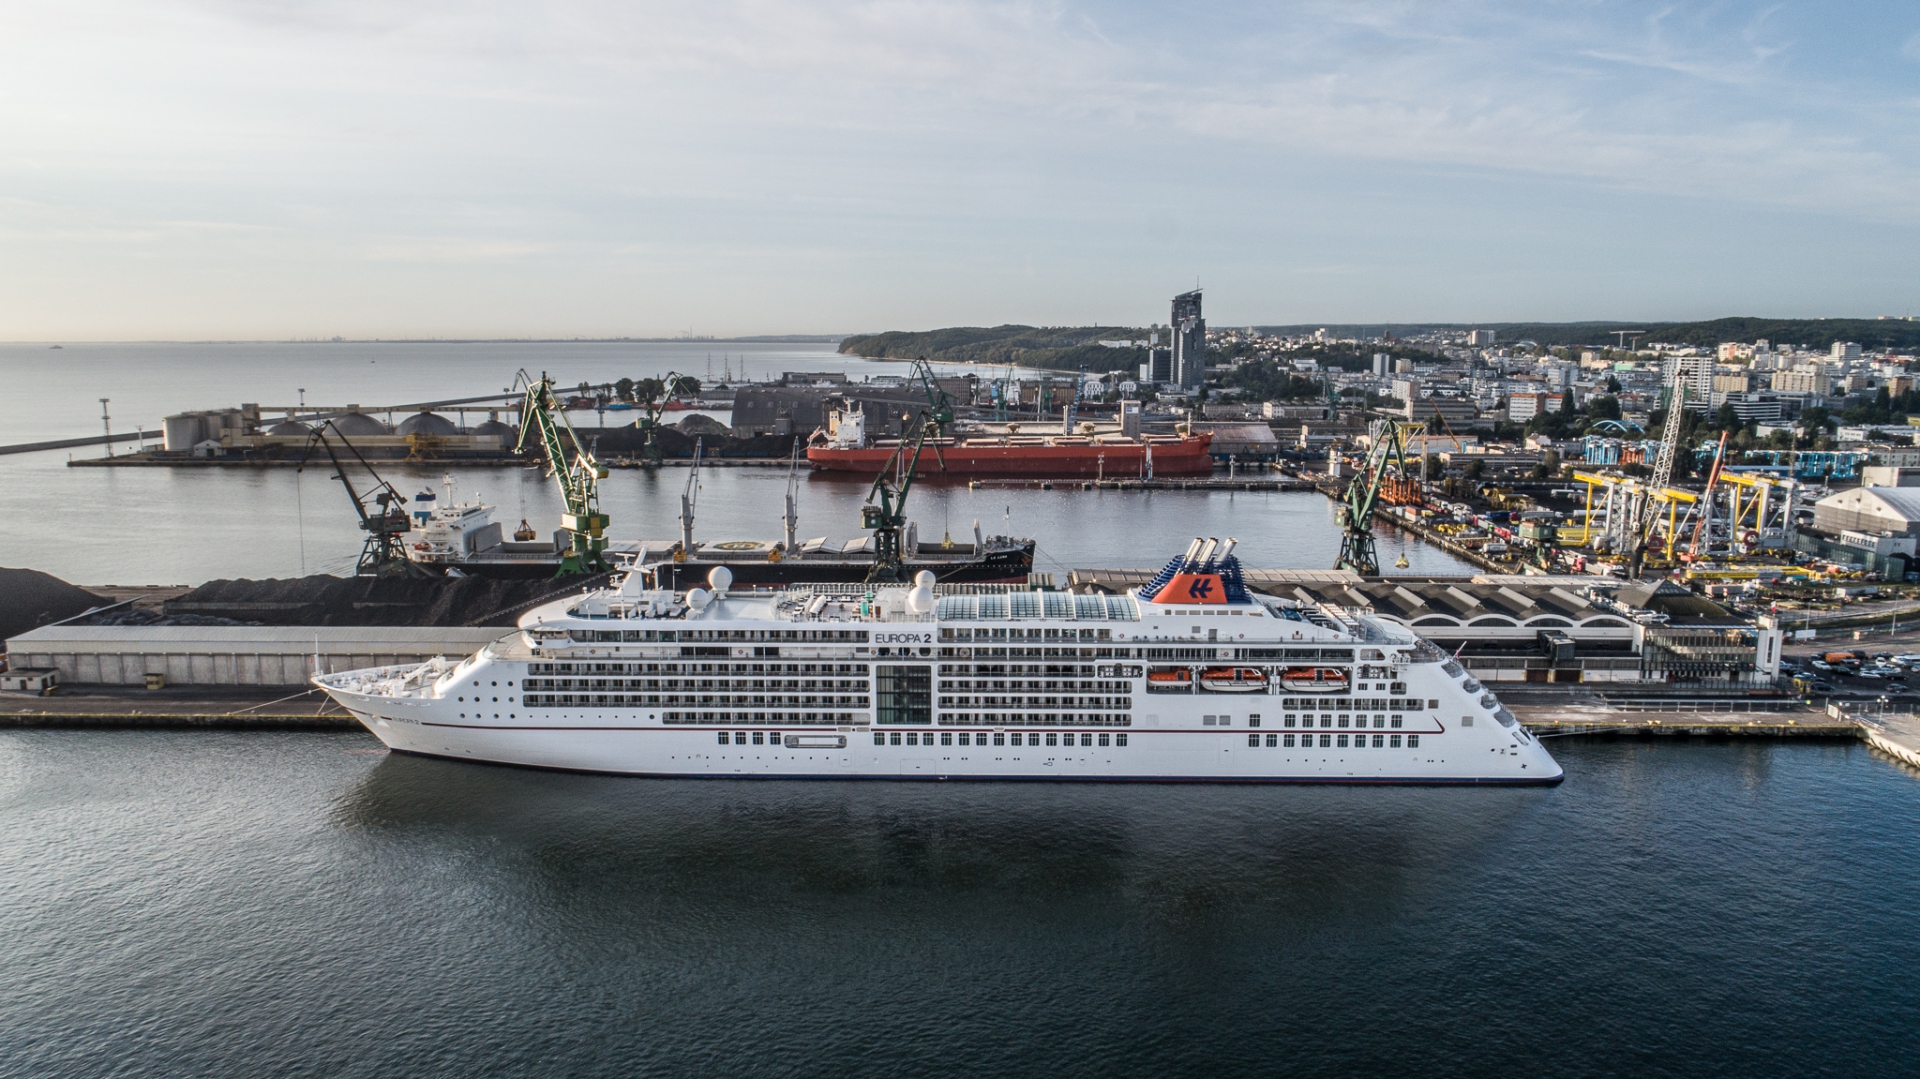 Europa 2: the first cruise ship of the season at the Port of Gdynia [photo, video] - MarinePoland.com